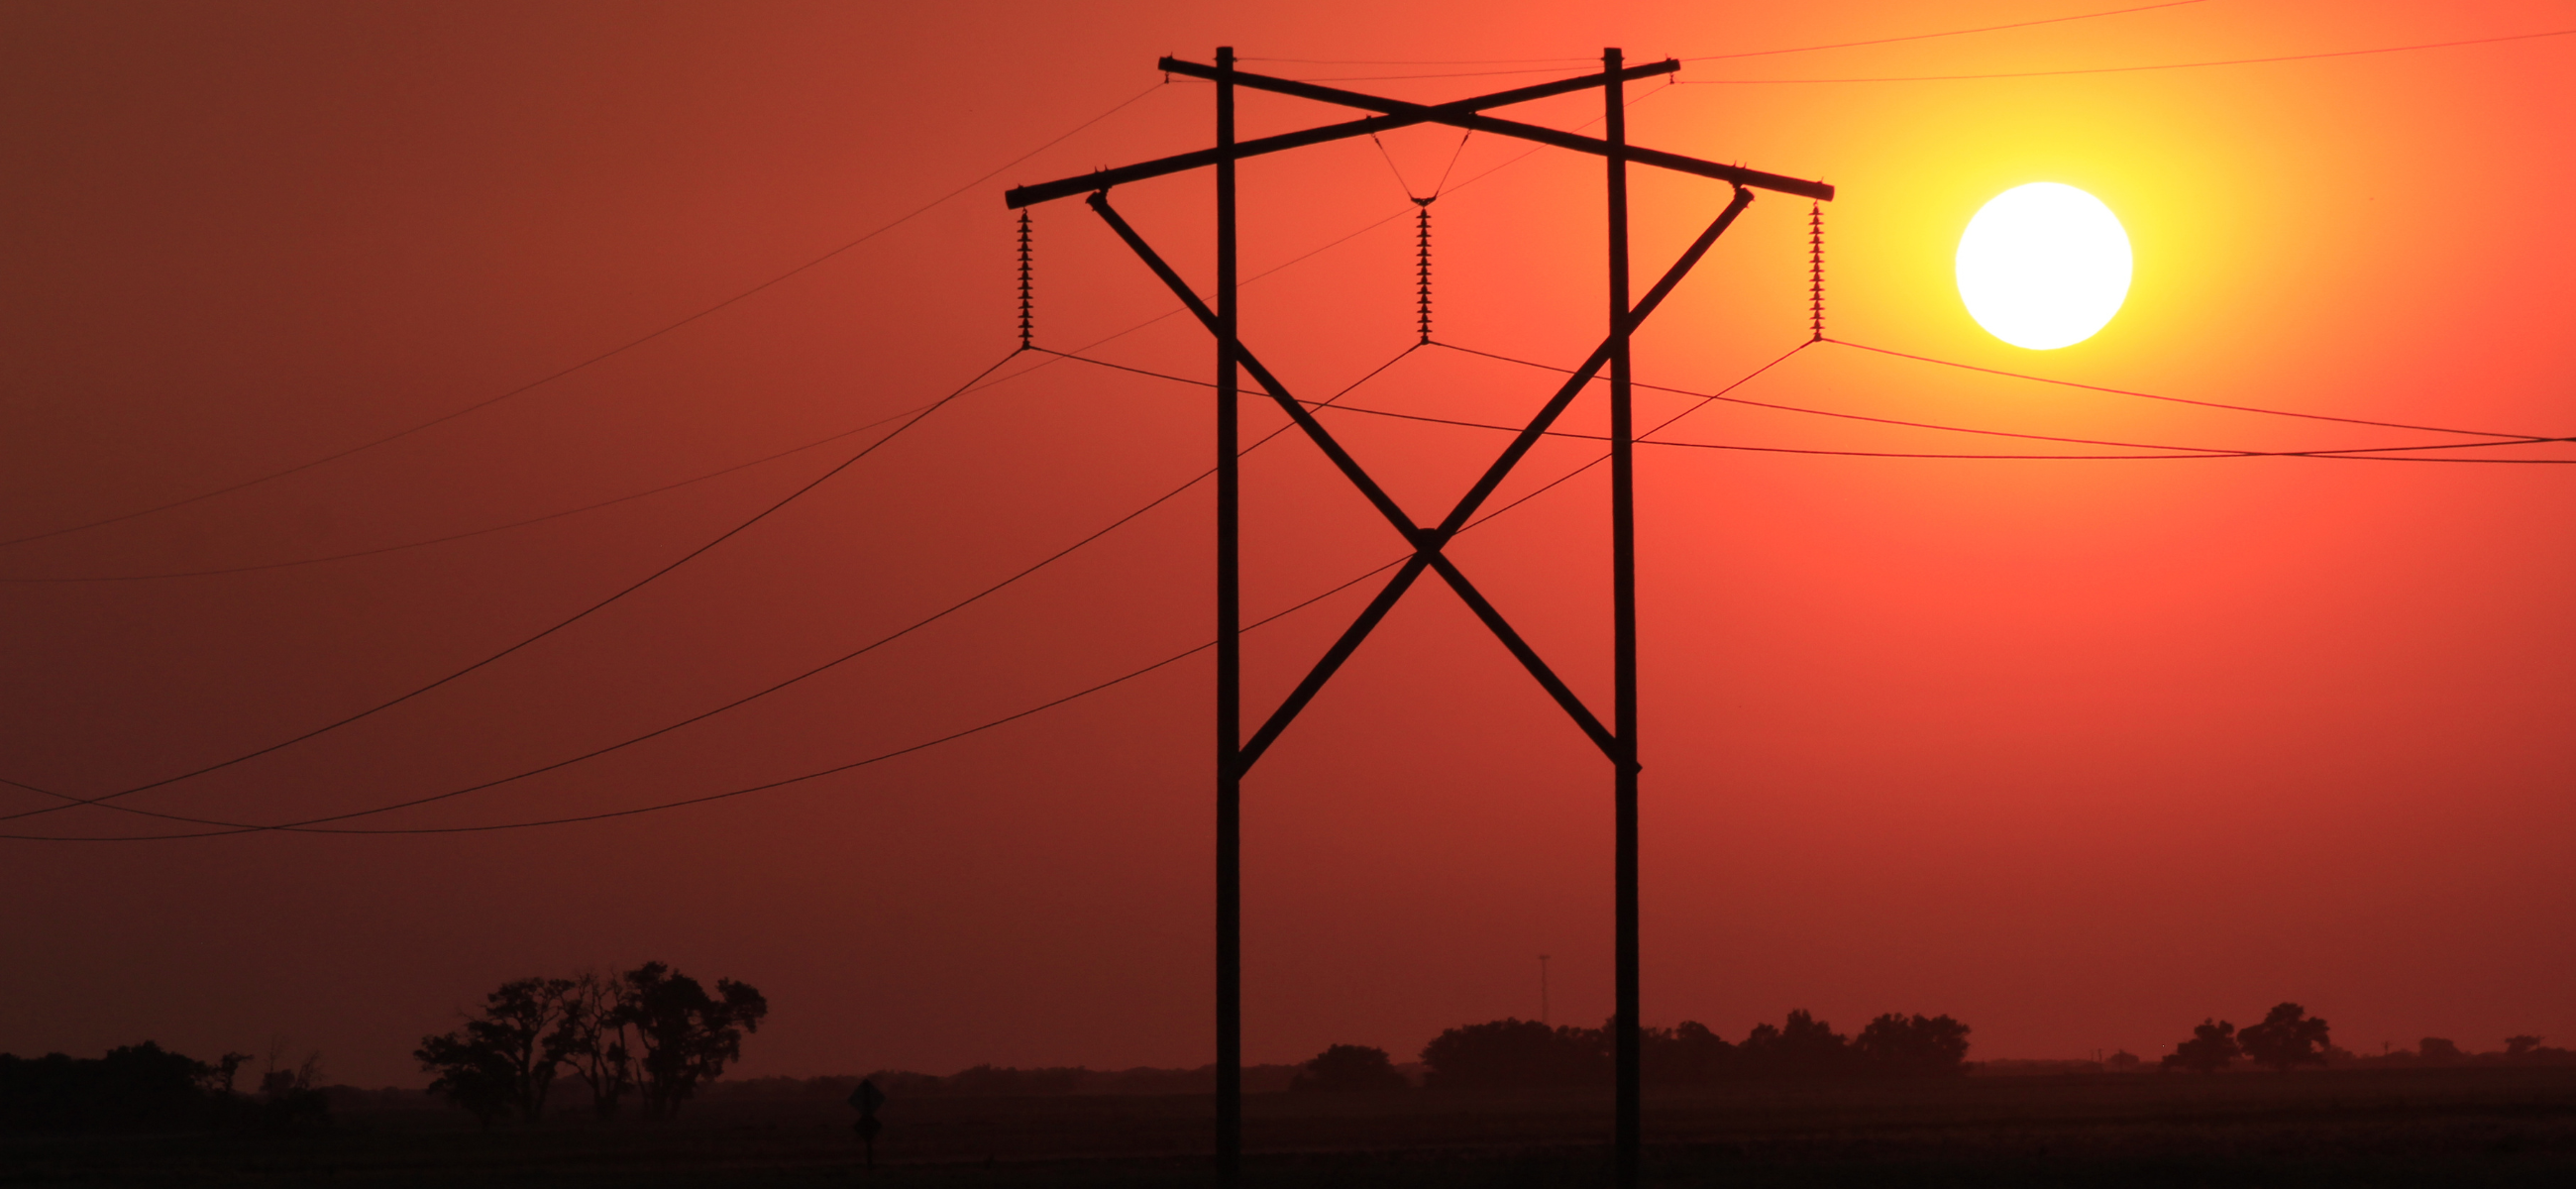 Power lines against red sunset in Nickerson, Kansas.